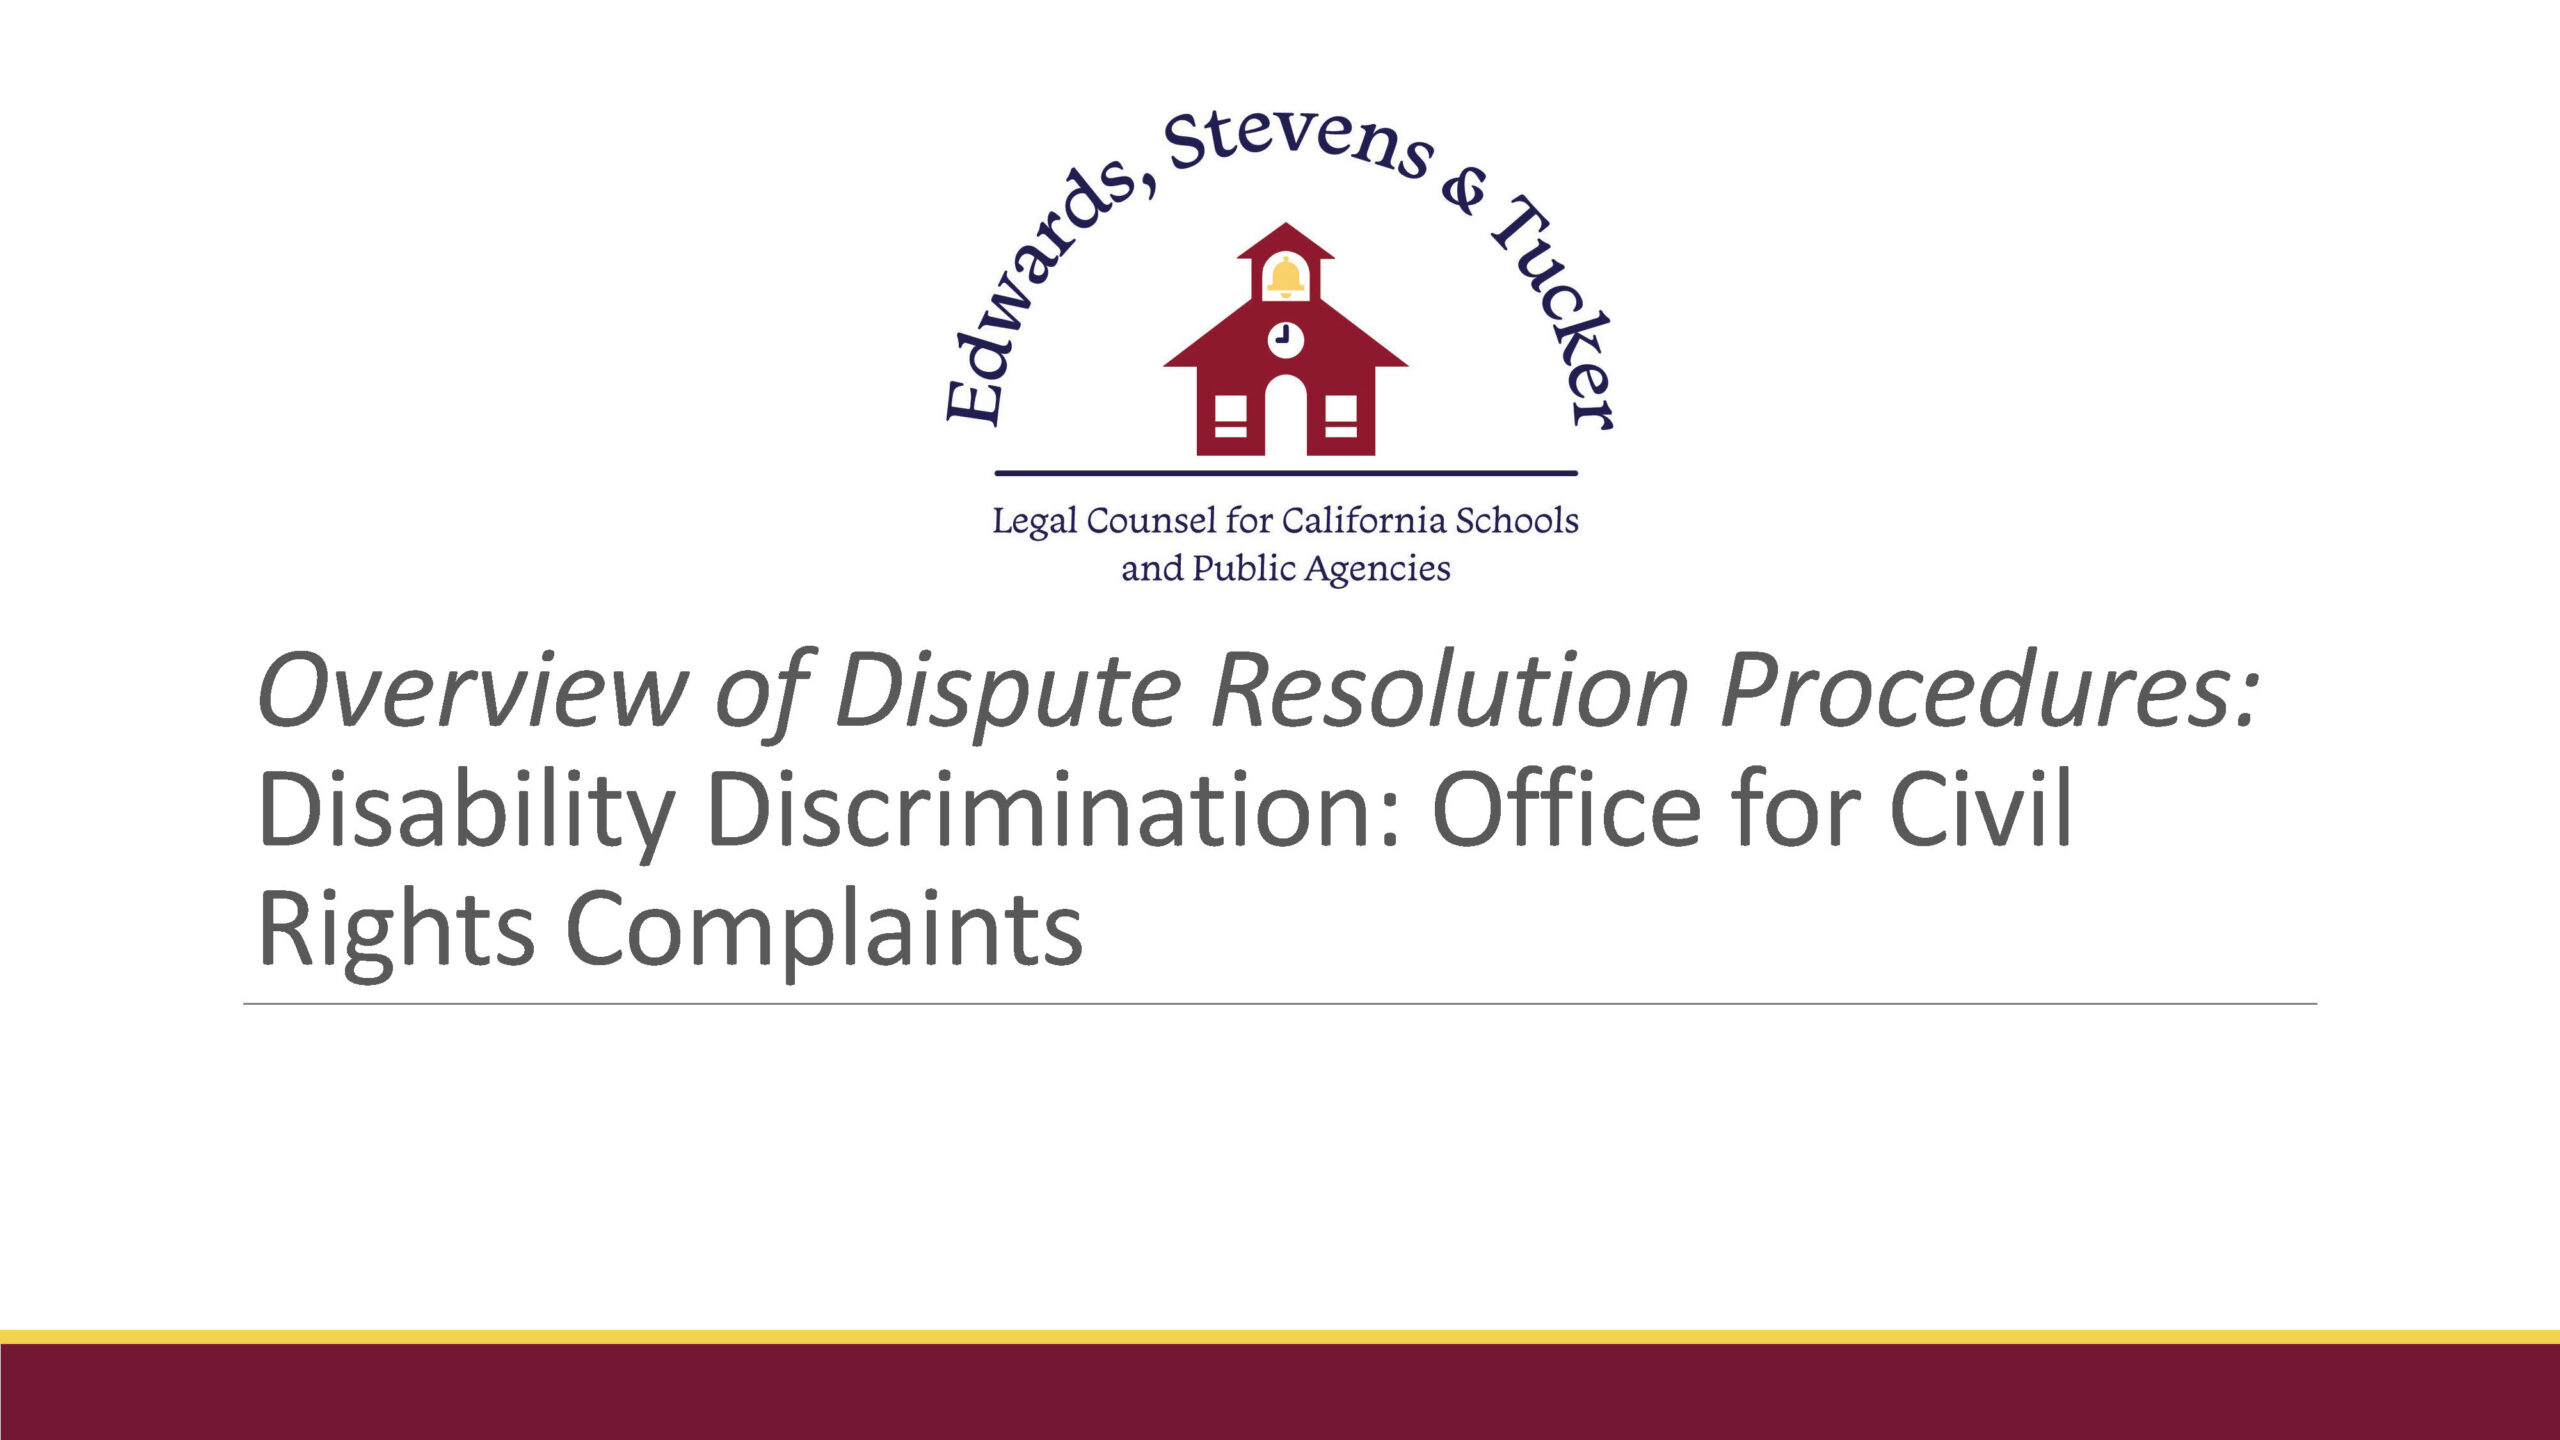 Disability Discrimination: Office for Civil Rights Complaints